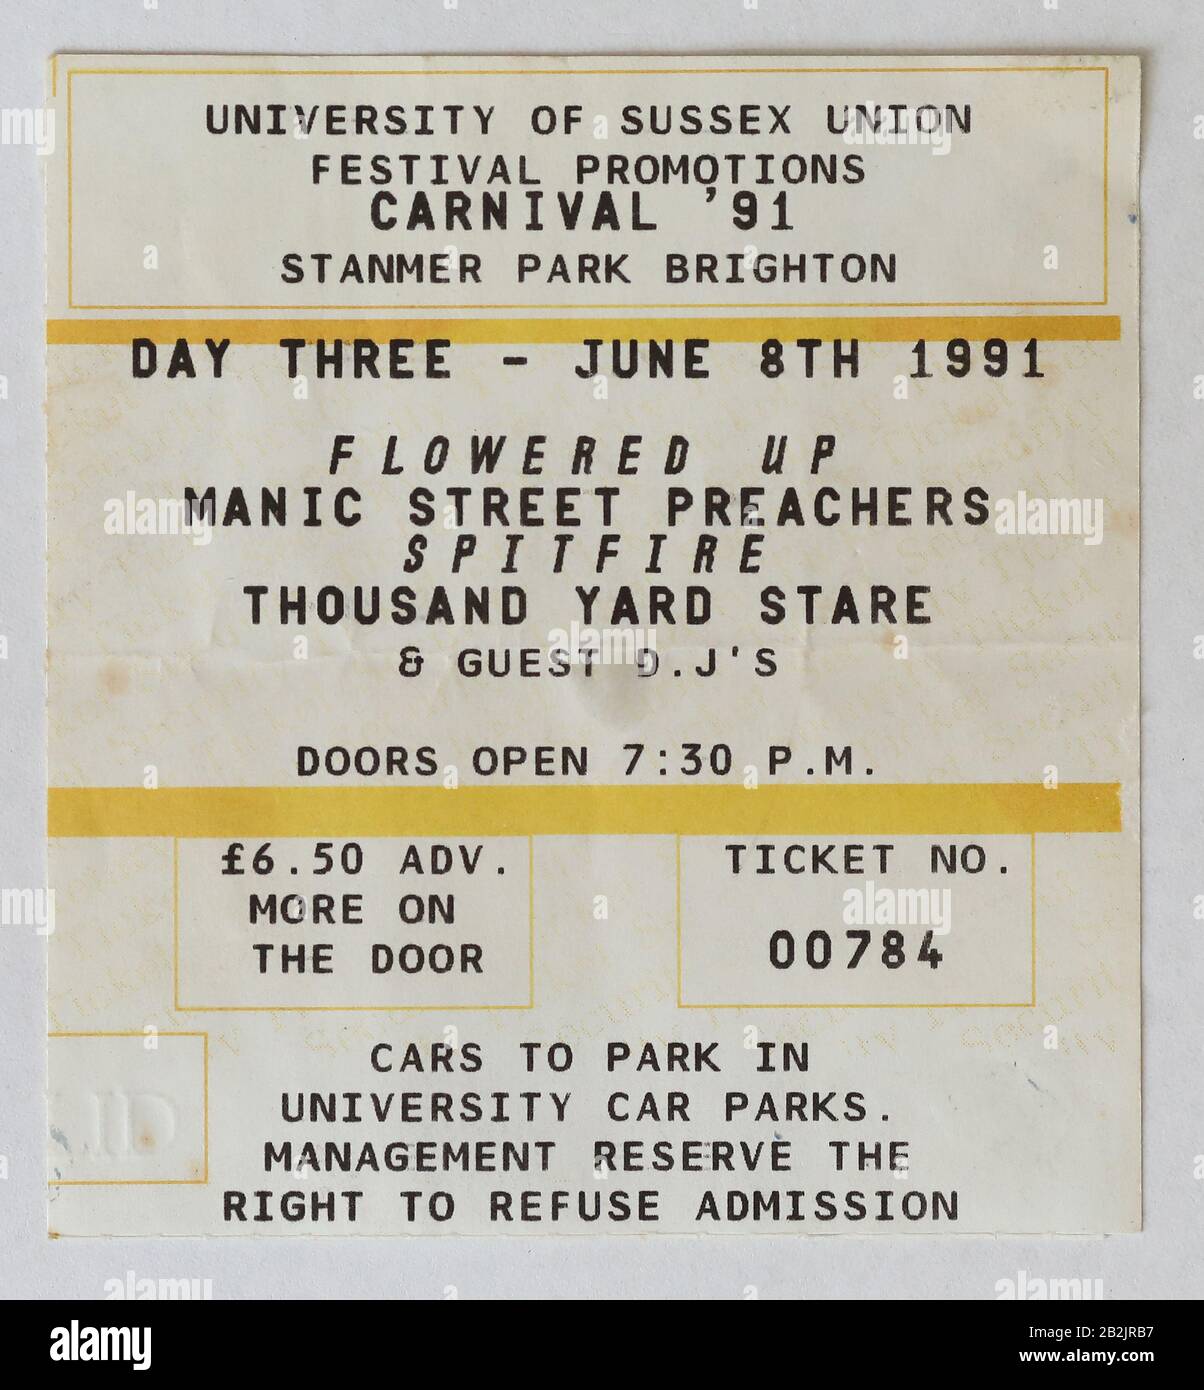 Carnival Õ91Õ featuring Flowered Up, Manic Street Preachers, Spitfire and Thousand Yard Stare gig ticket stub 1991 Picture by James Boardman. Stock Photo